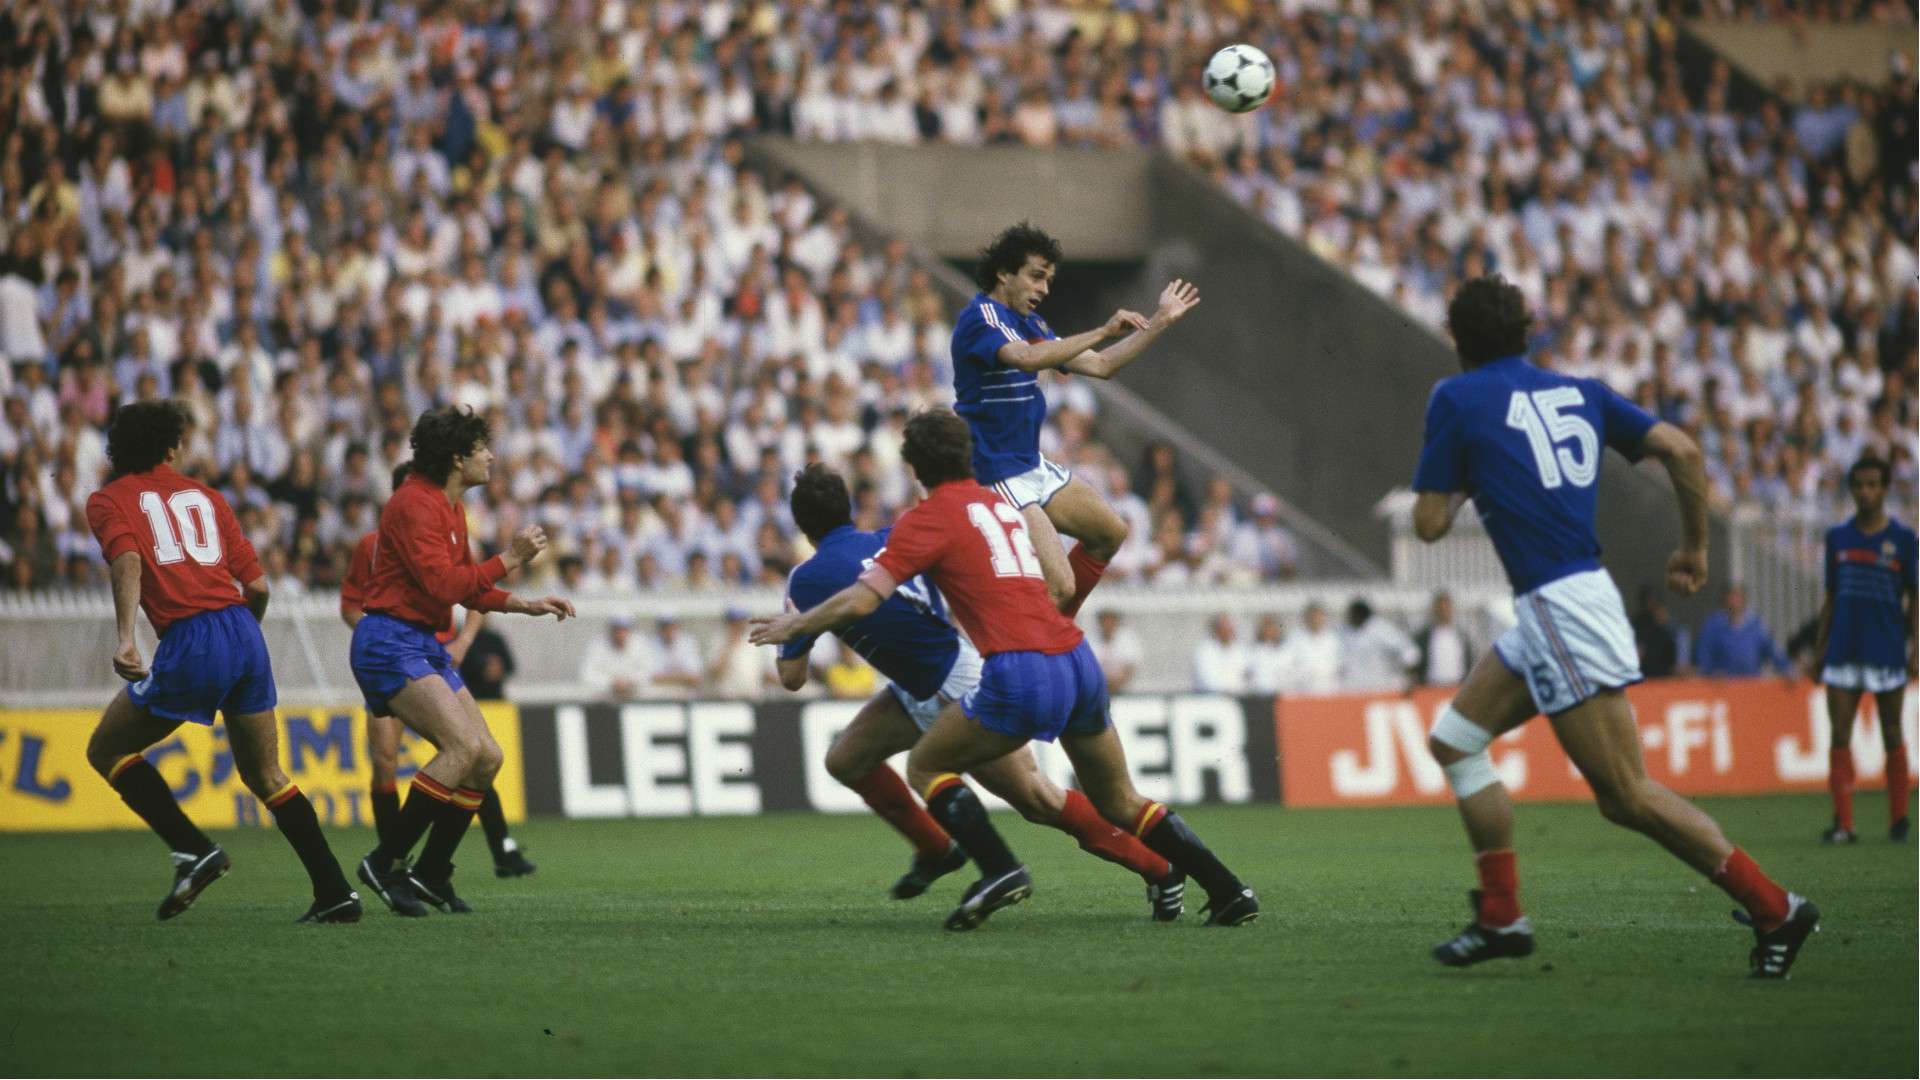 Michel Platini heading the ball against Spain in the 1984 Euro final